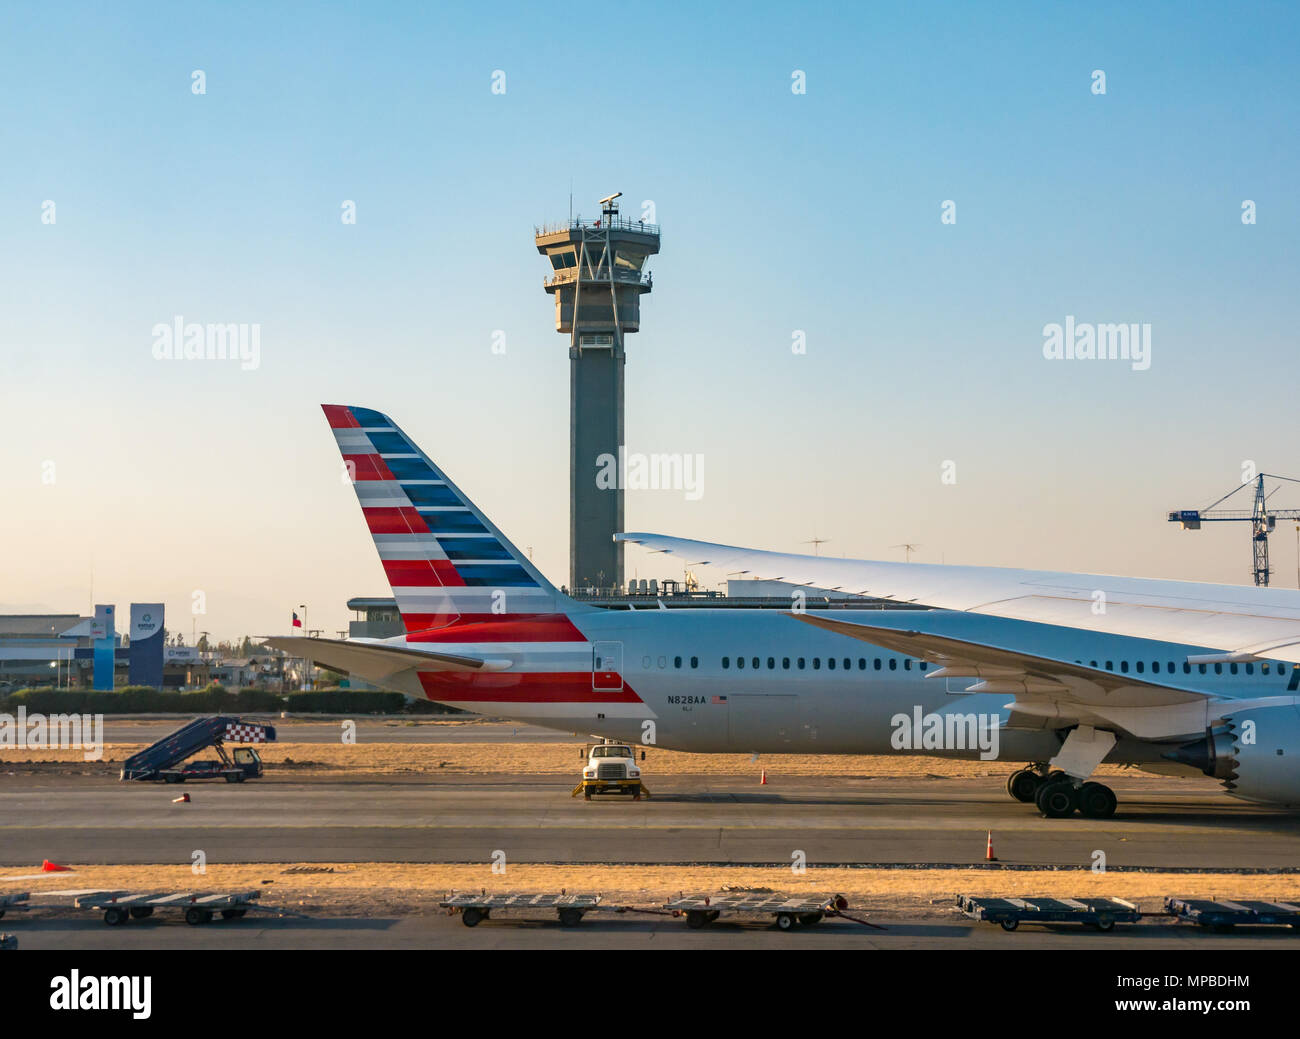 American Airlines Boeing 787 Dreamliner aeroplane on airport apron in front of control tower, Santiago International airport, Chile Stock Photo